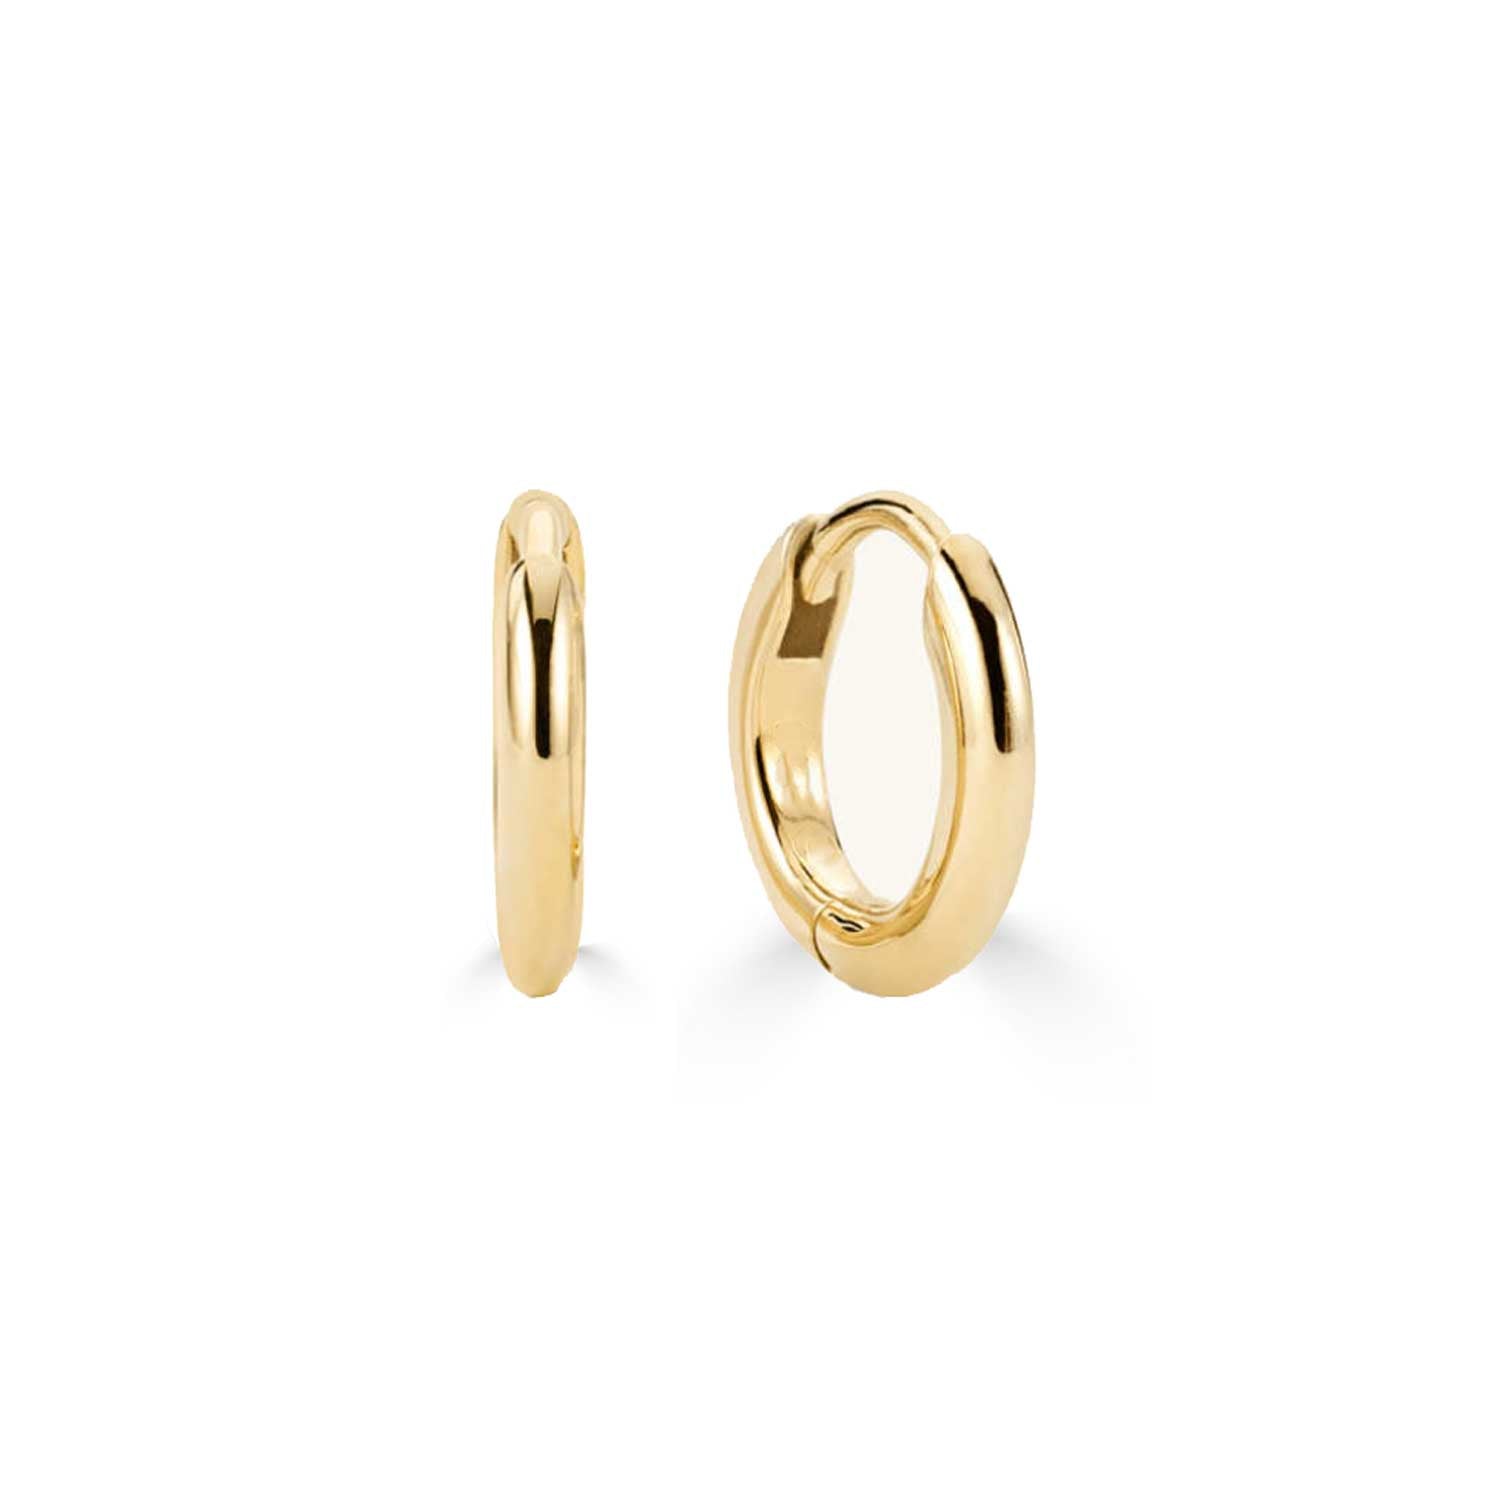 3.3mm Script Name Bamboo Heart Hoop Earrings in Sterling Silver with 14K  Gold Plate (1 Line)